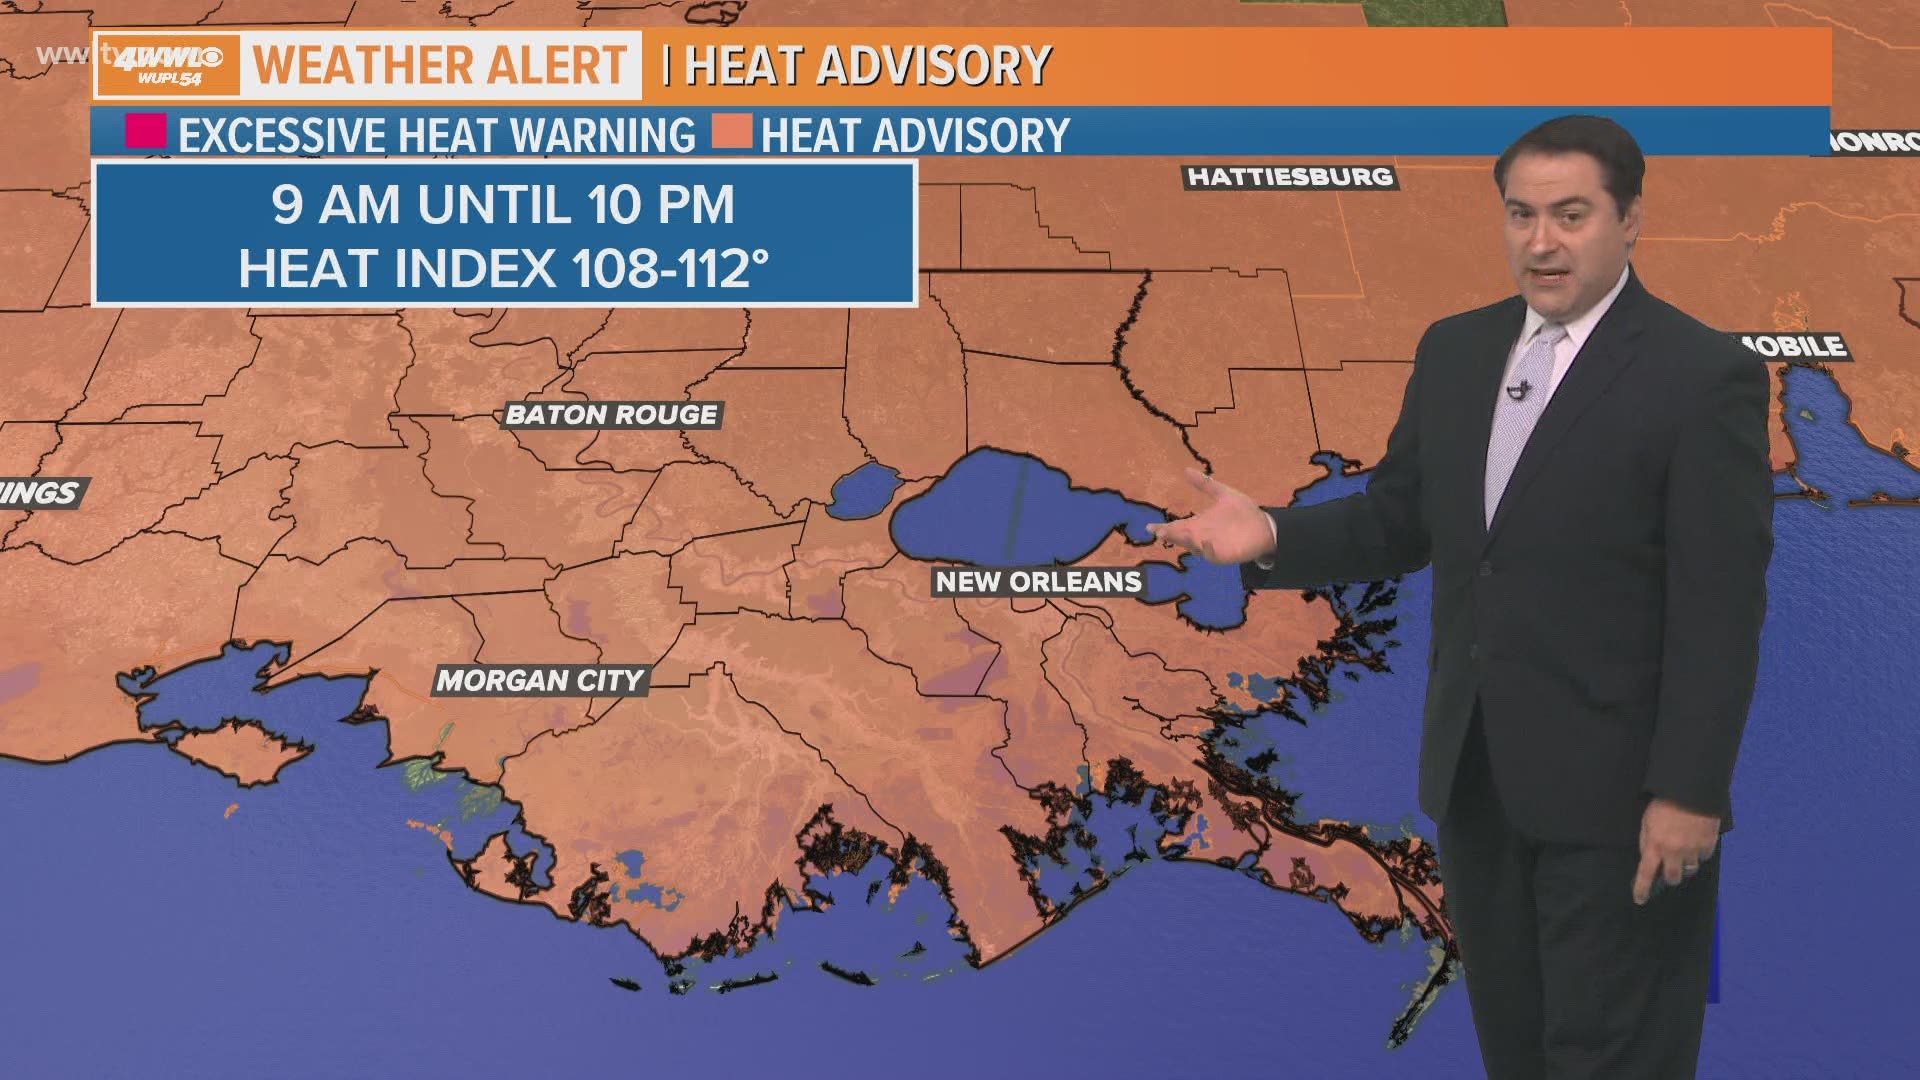 Meteorologist Dave Nussbaum says a Heat Advisory is in effect today with a heat index of 108-112°. More record heat is expected this weekend and into next week.